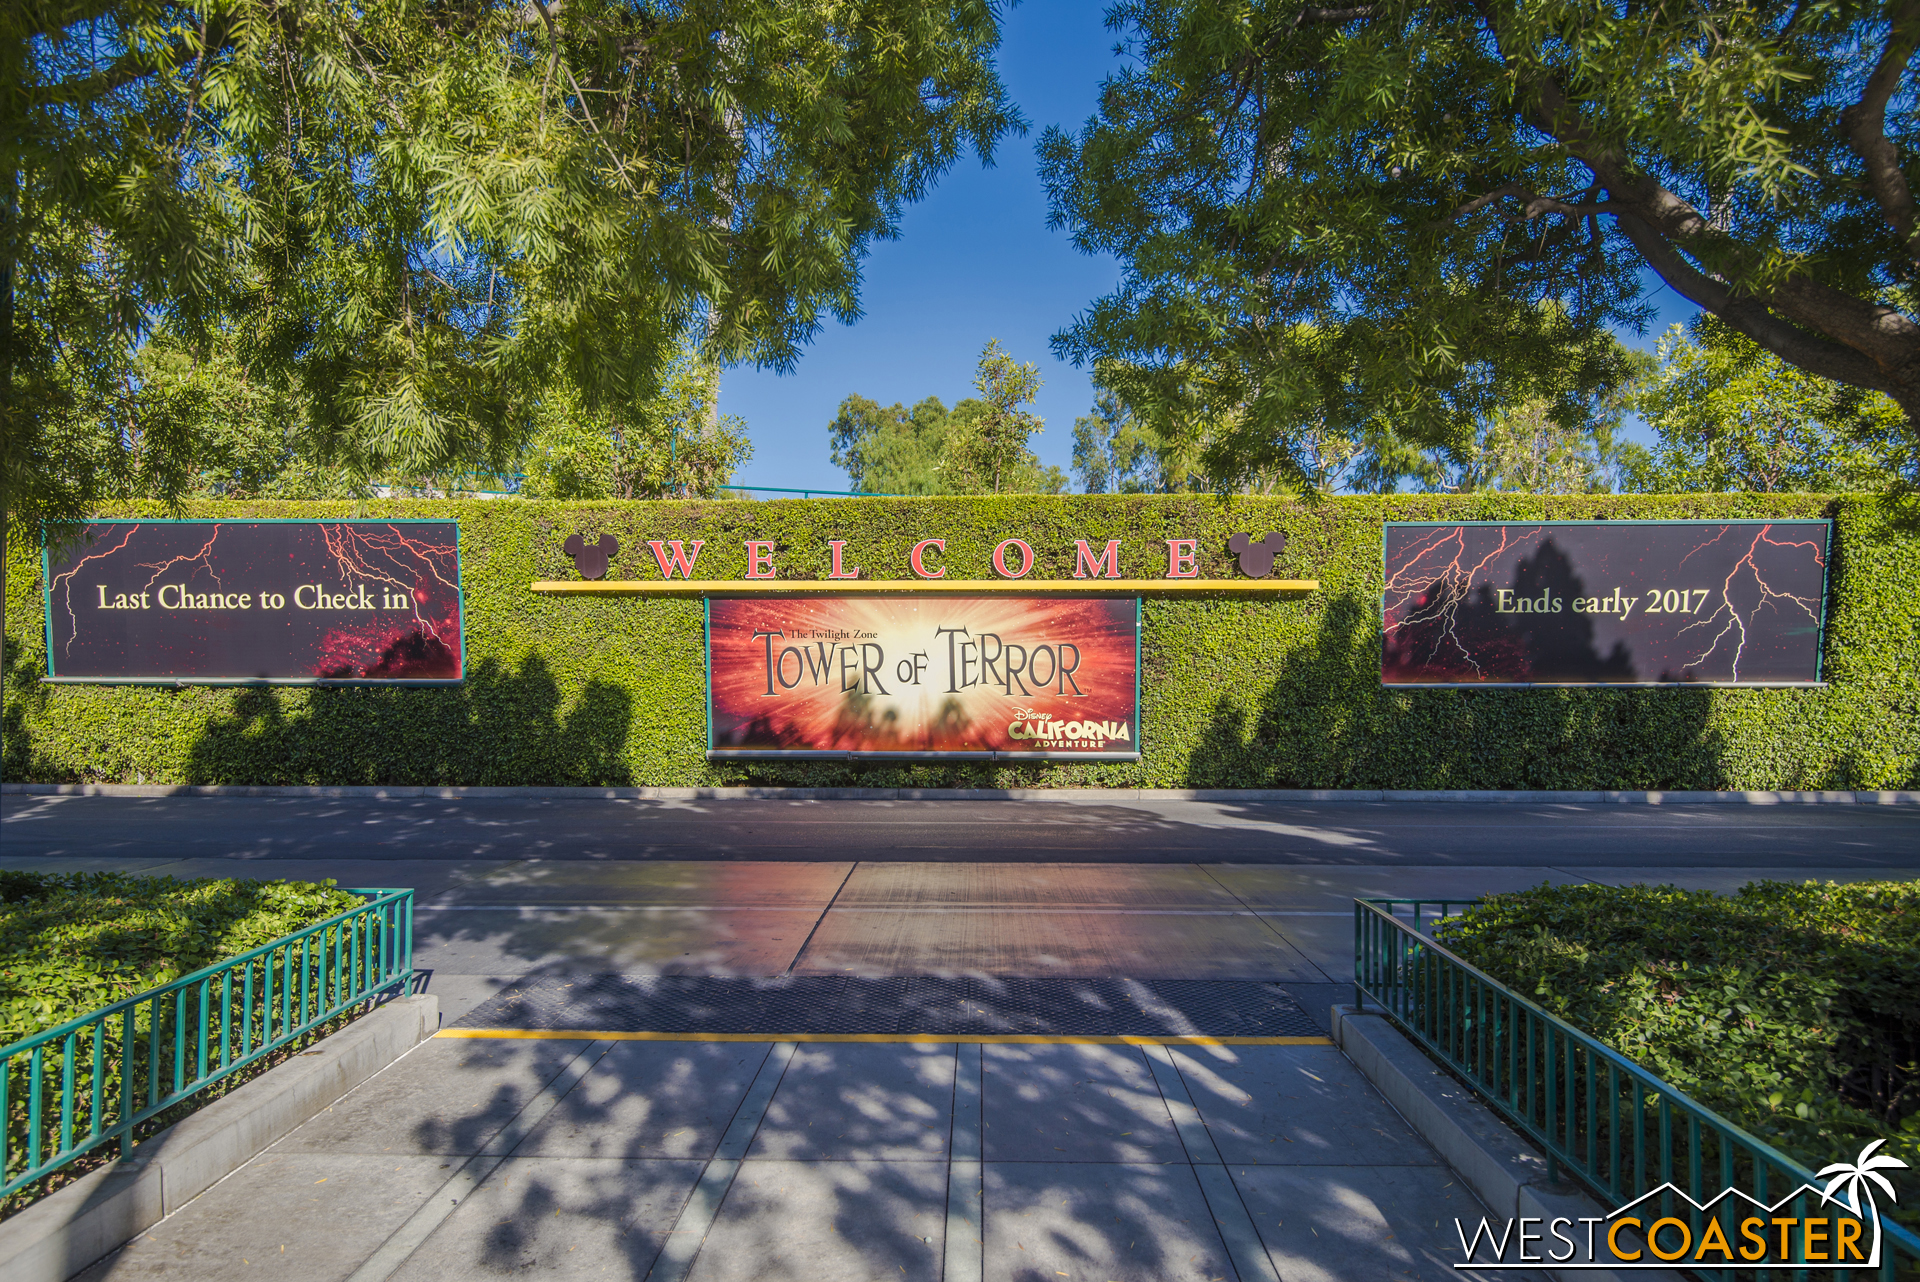  Here's the new Mickey and Friends Parking tram loading area poster. 